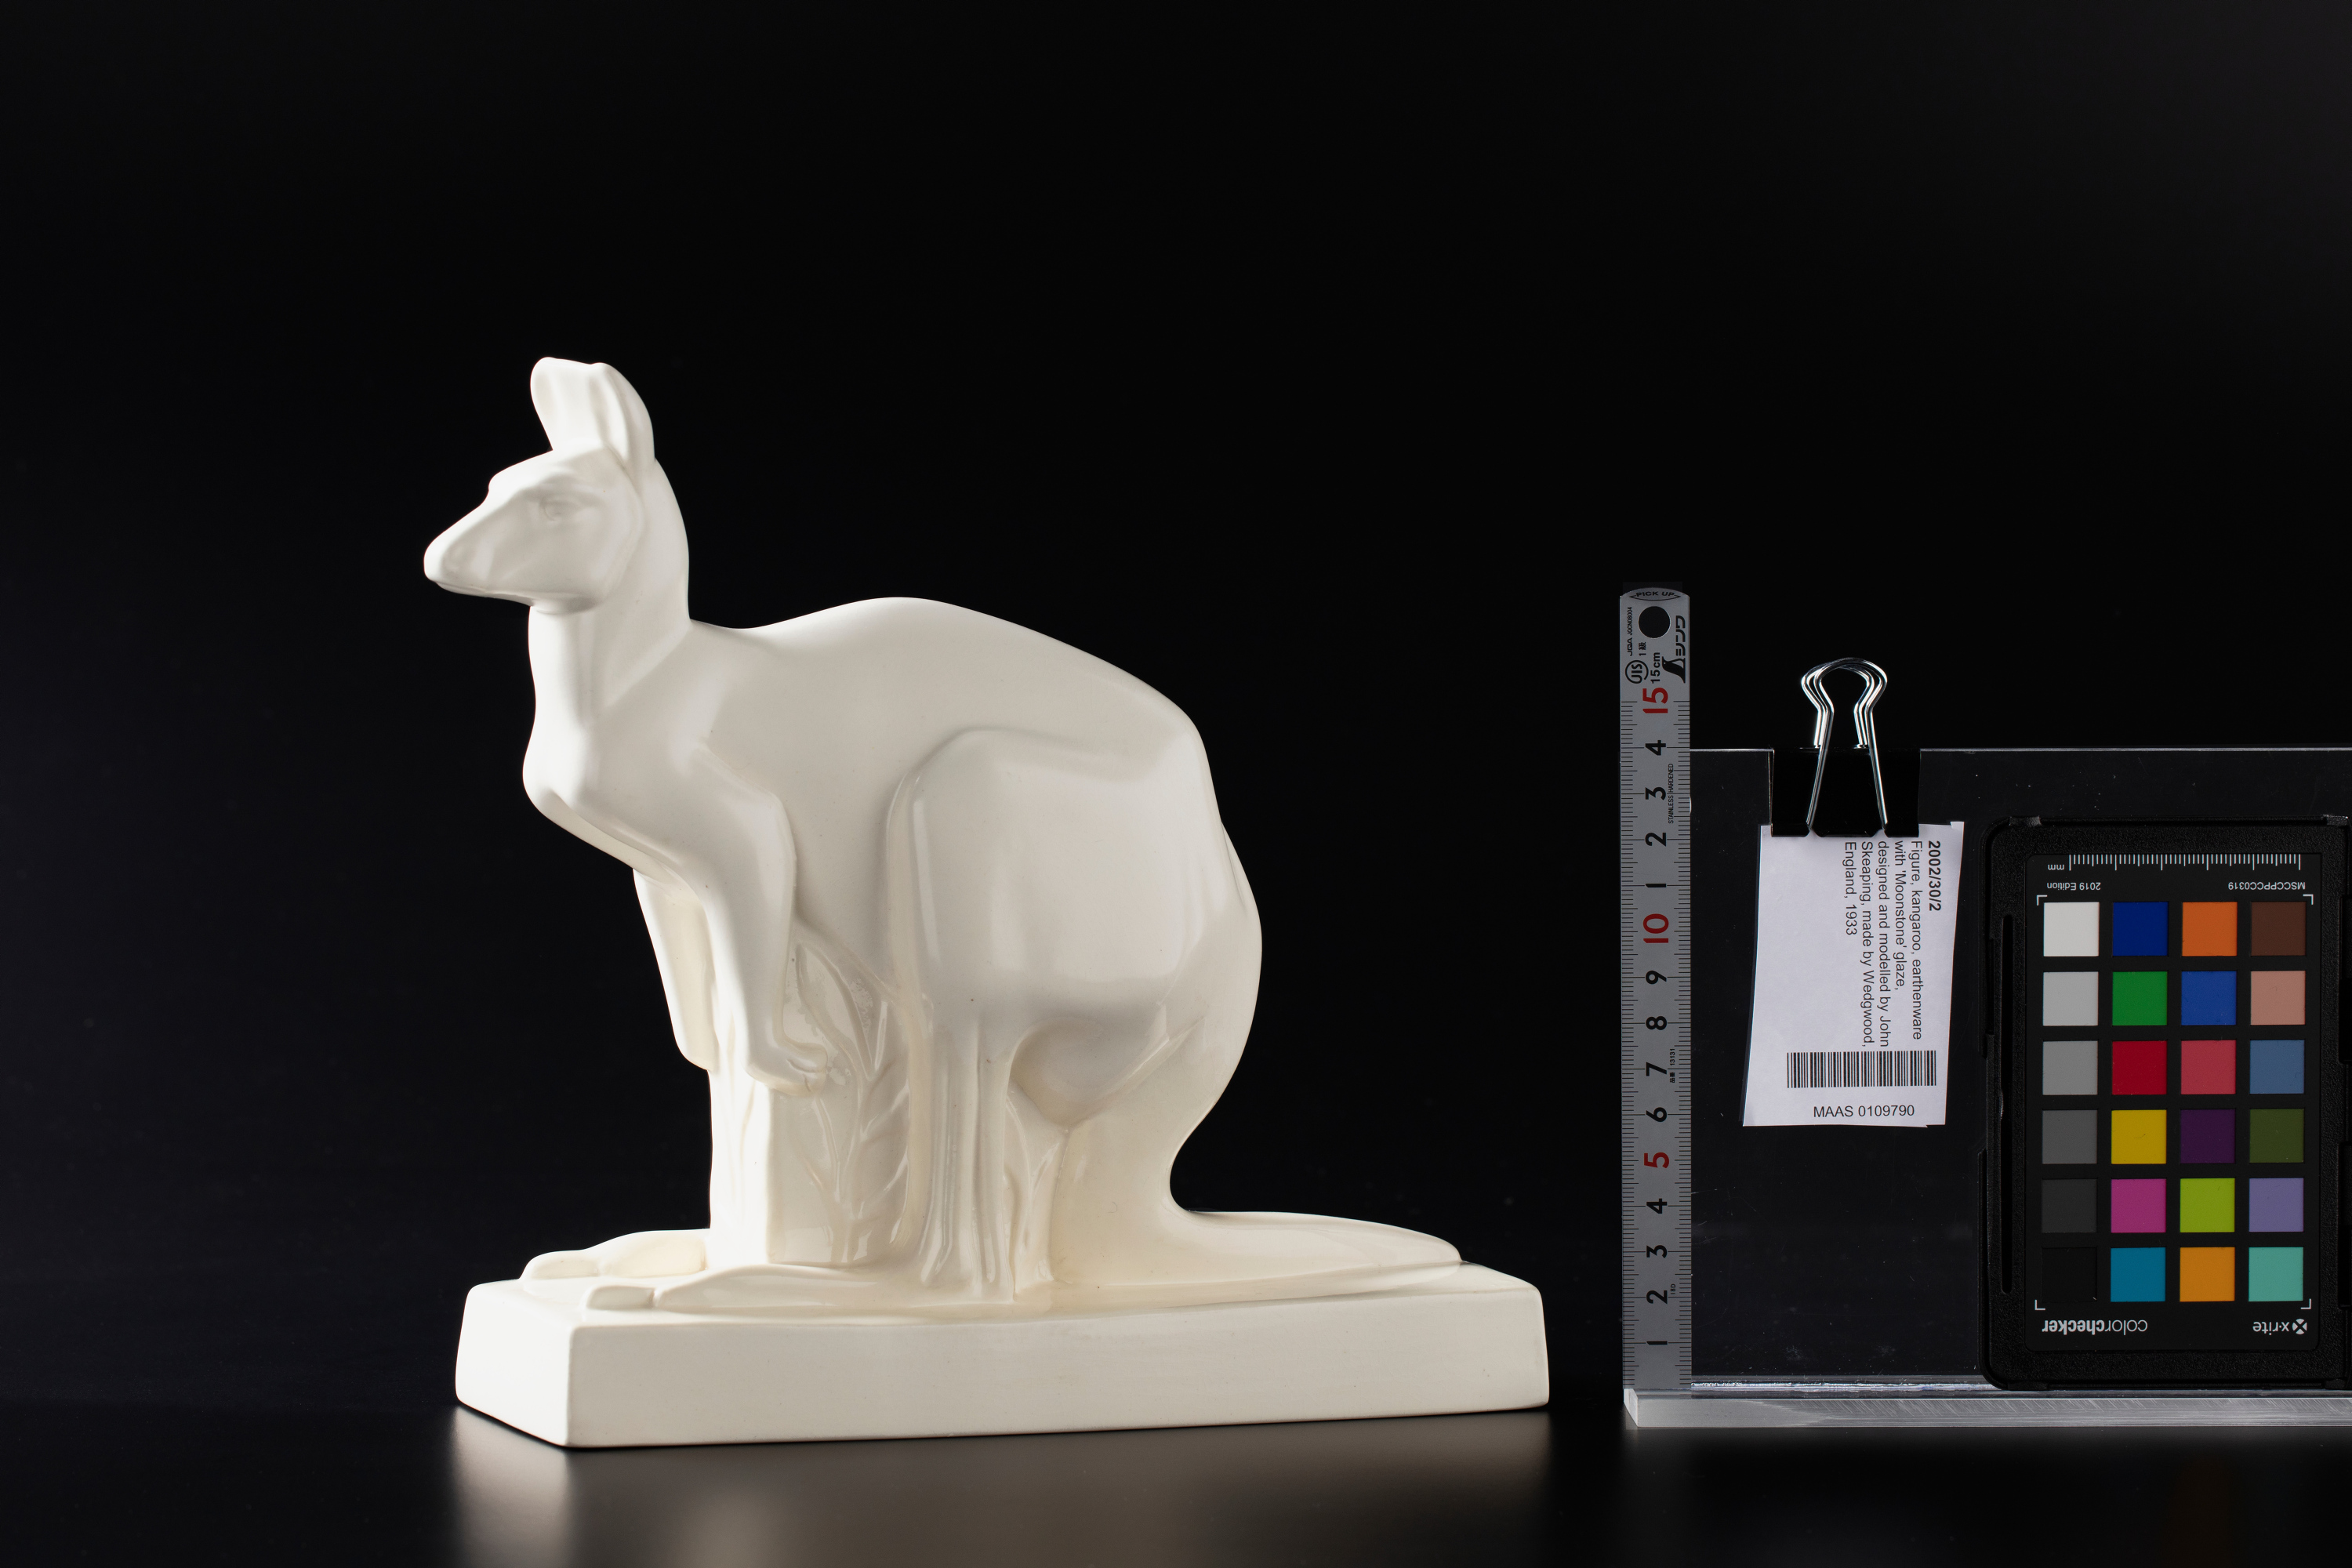 White earthenware kangaroo on a black studio background. To the right of the kangaroo is a upright metal ruler (for scale), paper object tag, and colour reference chart. The kangaroo is about 20cm tall.